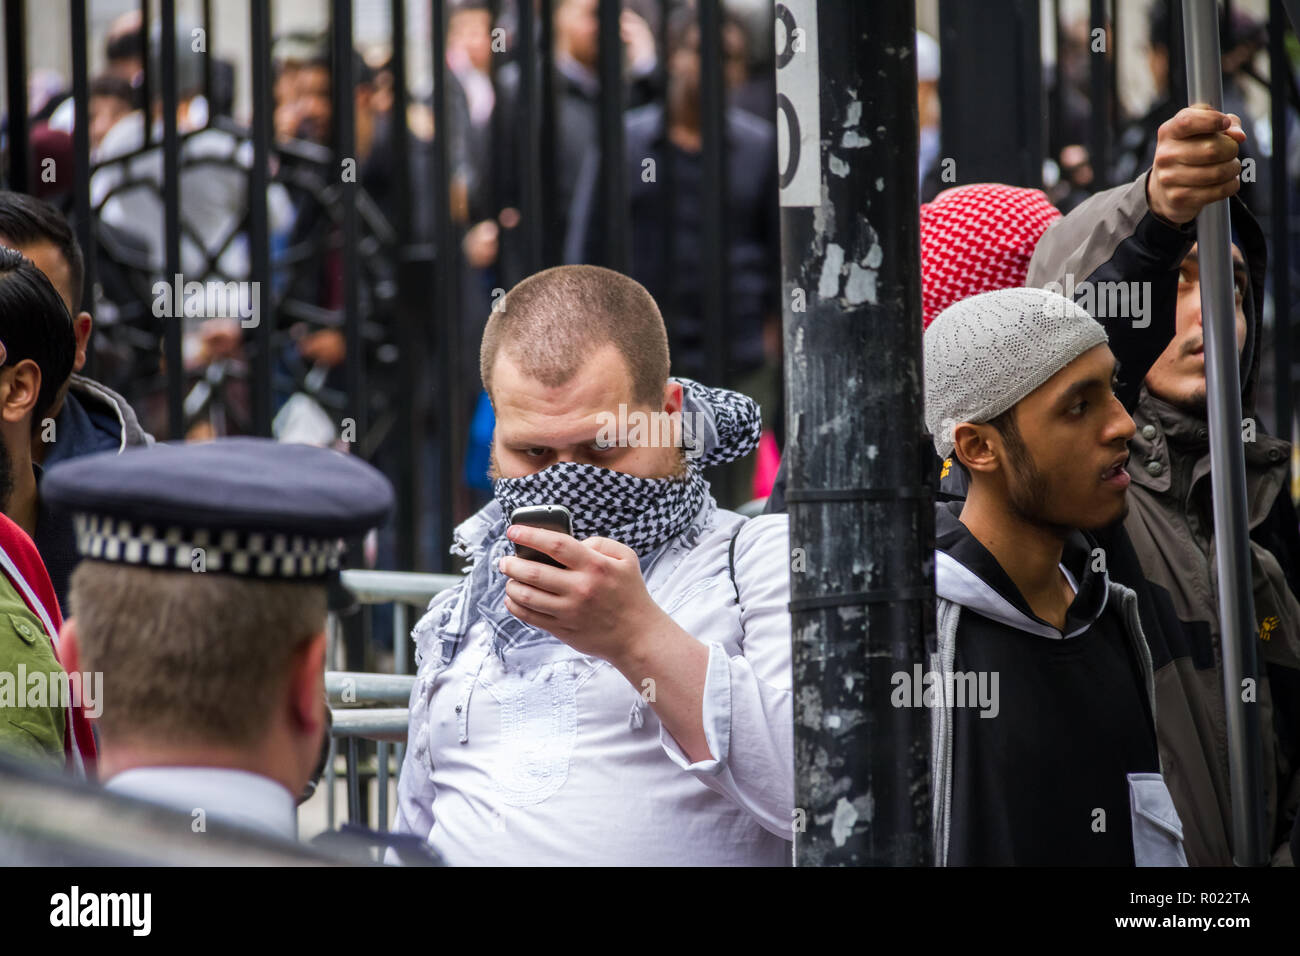 London, UK. 30th May, 2014. File Image from 30-05-2014: Lewis Ludlow, 26, from Rochester in Kent, a Muslim convert (pic centre, with phone) also used the name Ali Hussain, is due to be sentenced for plotting an Islamic State-inspired attack on Oxford Street in which he hoped to kill 100 people. Ludlow is seen here in 2014 outside the London Central Mosque during a protest organised by radical cleric Anjem Choudary and his banned Al-Muhajiroun (ALM) group. Credit: Guy Corbishley/Alamy Live News Stock Photo